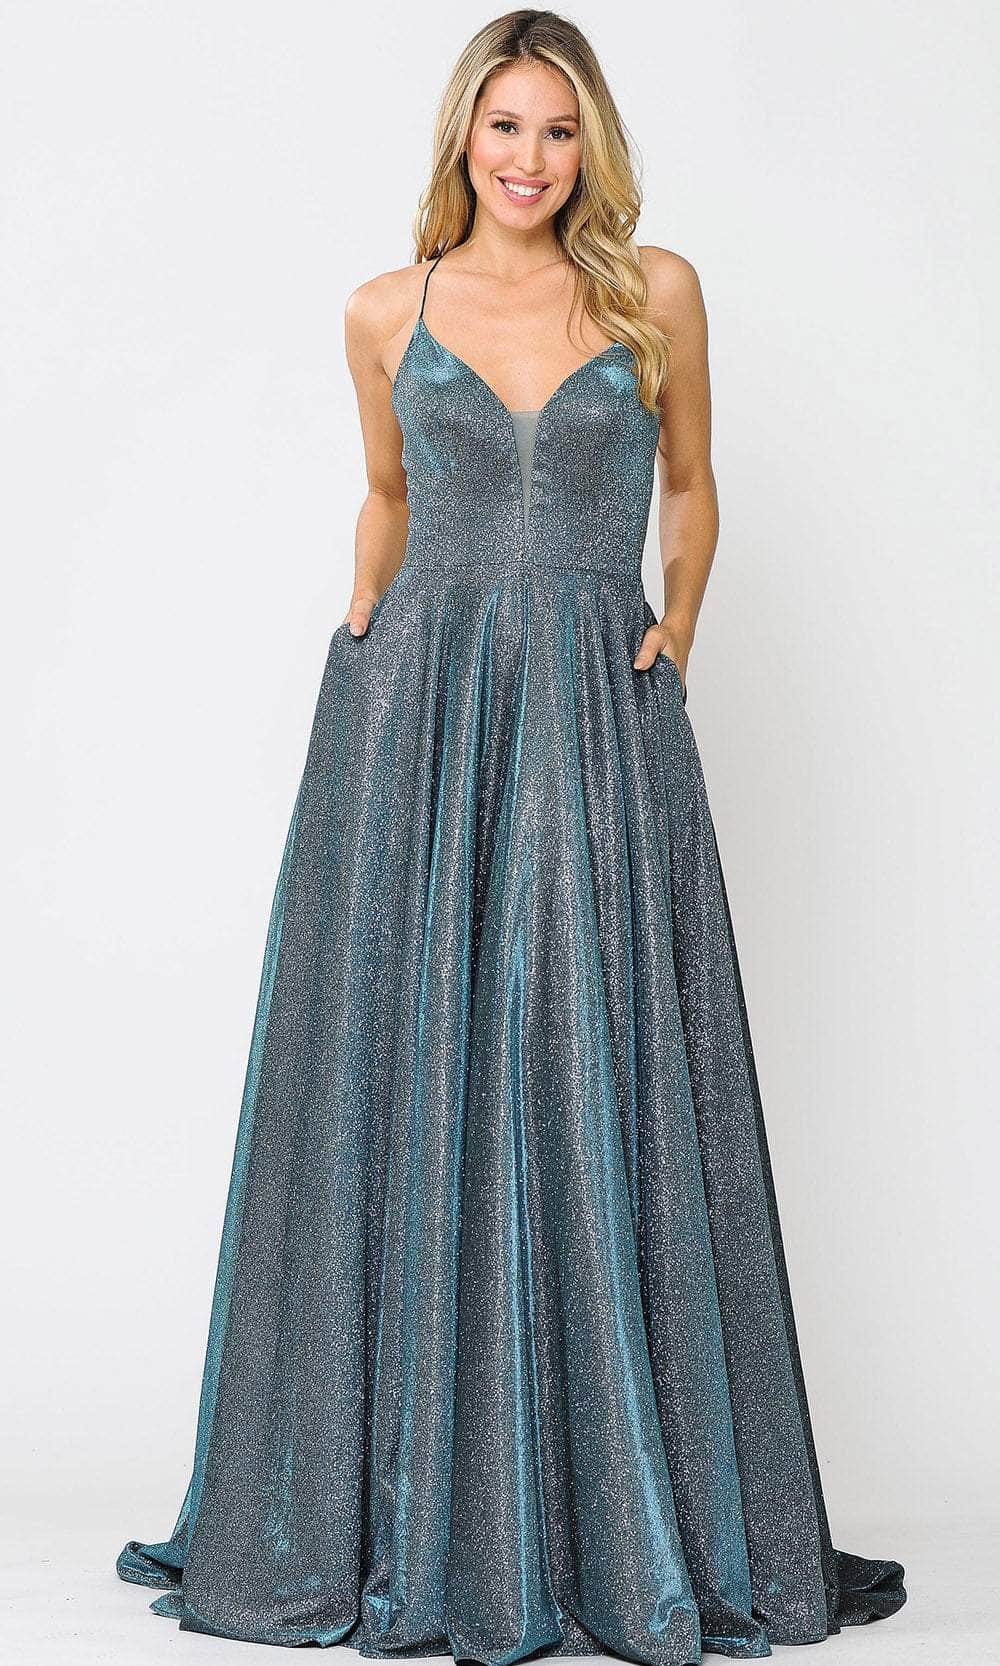 Image of Poly USA 8556 - Glittered Deep V-neck A-Line Gown